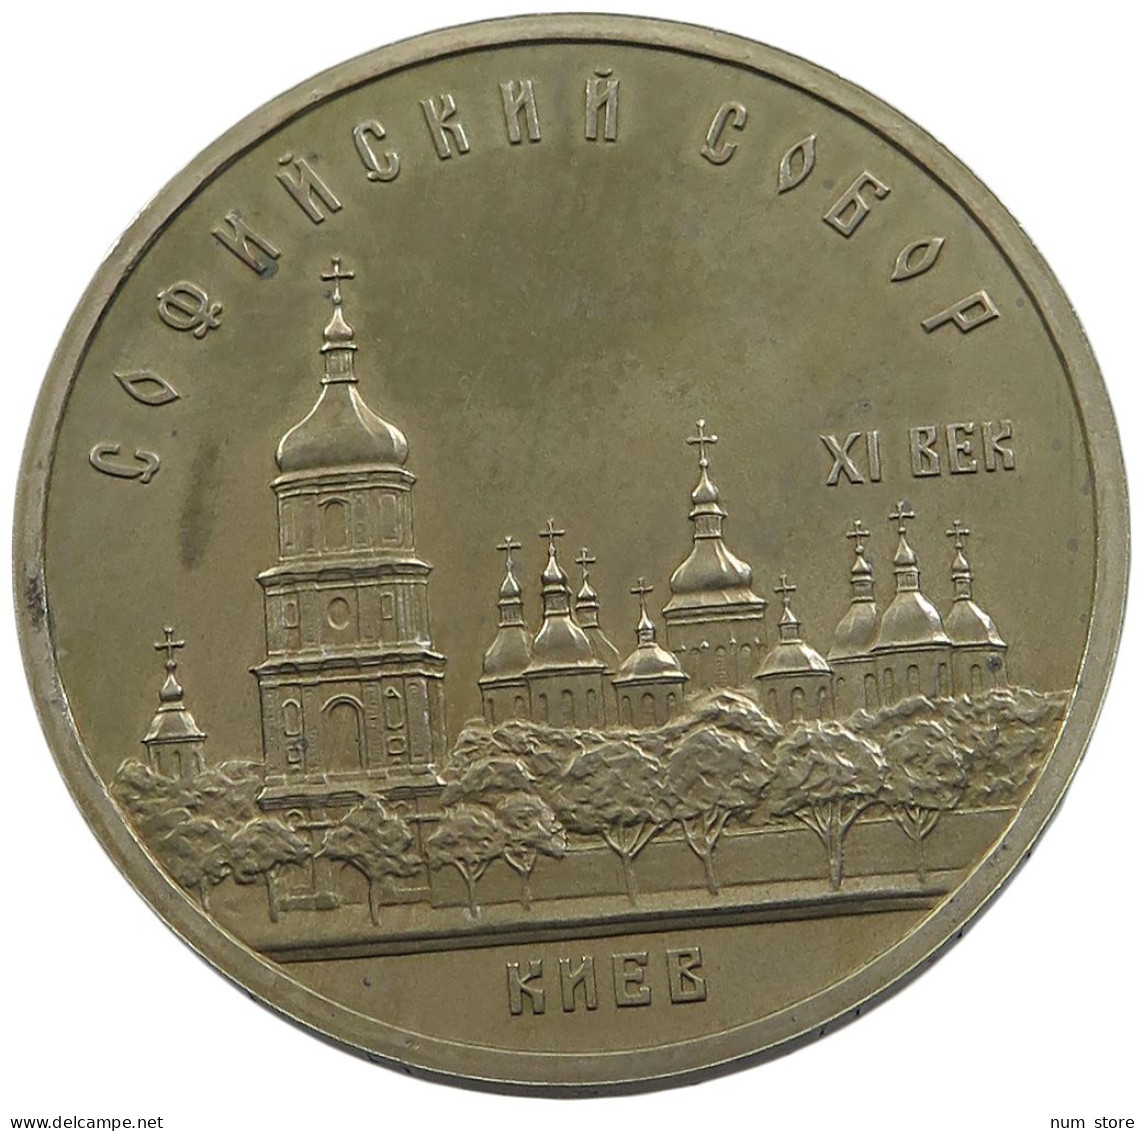 RUSSIA USSR 5 ROUBLES 1988 PROOF #sm14 0843 - Russland